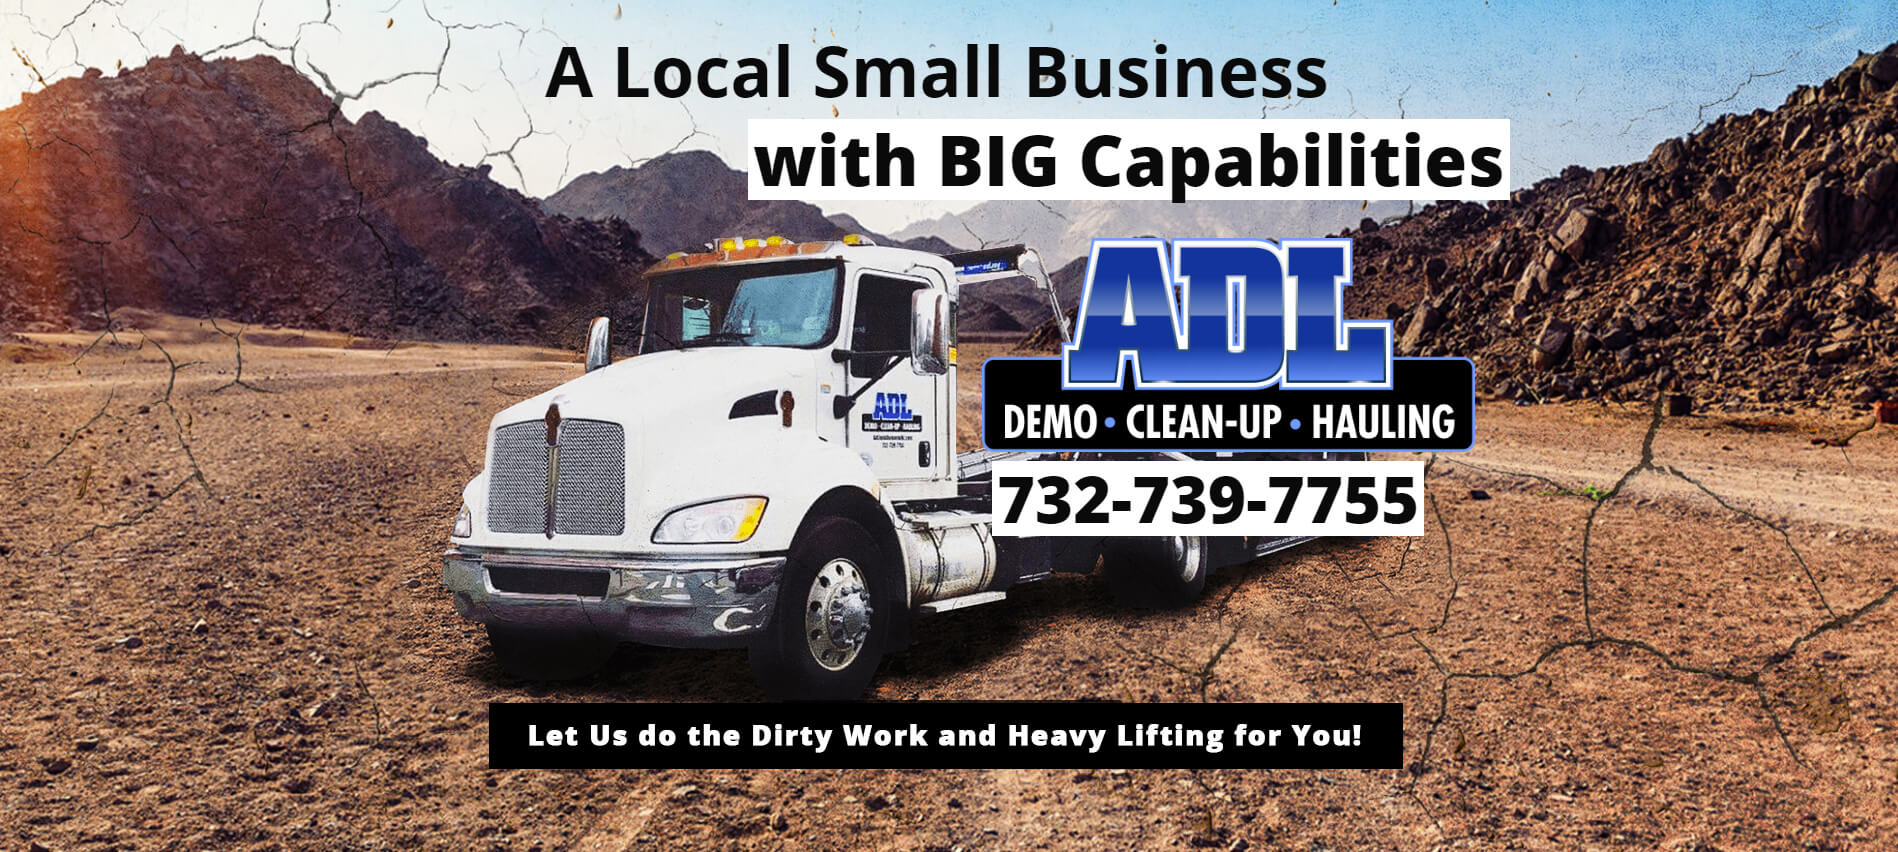 A local business with big capabilities, ADL demo clean-up and hauling. 732-739-7755 - Let us do the dirty work and heavy lifting for you